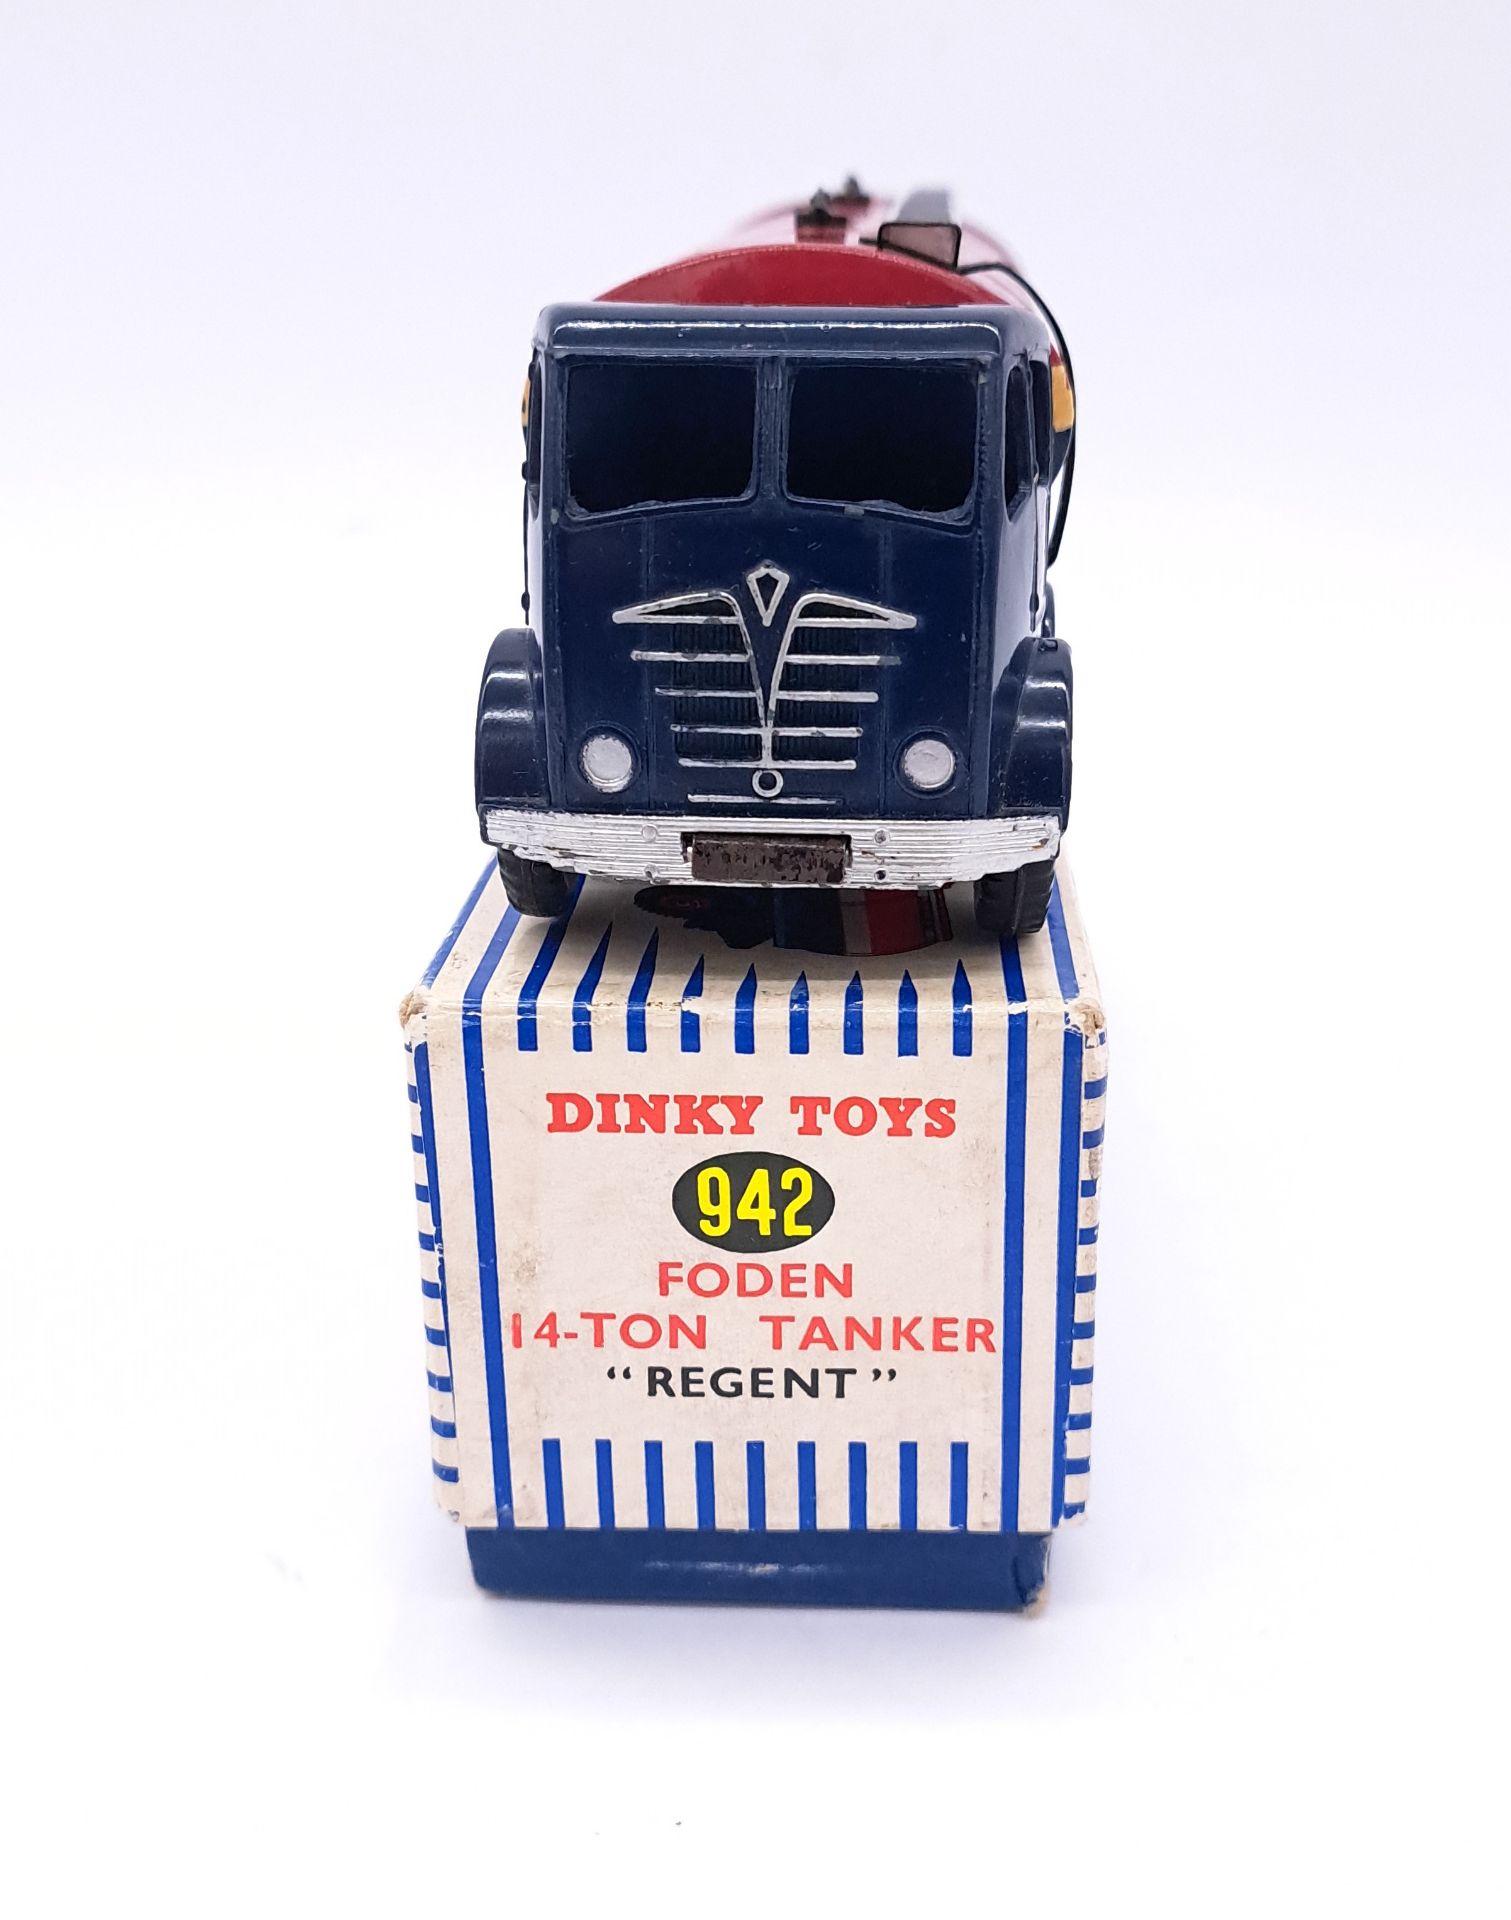 Dinky 942 Foden (2nd type) 14-ton "Regent" Tanker - Image 4 of 8